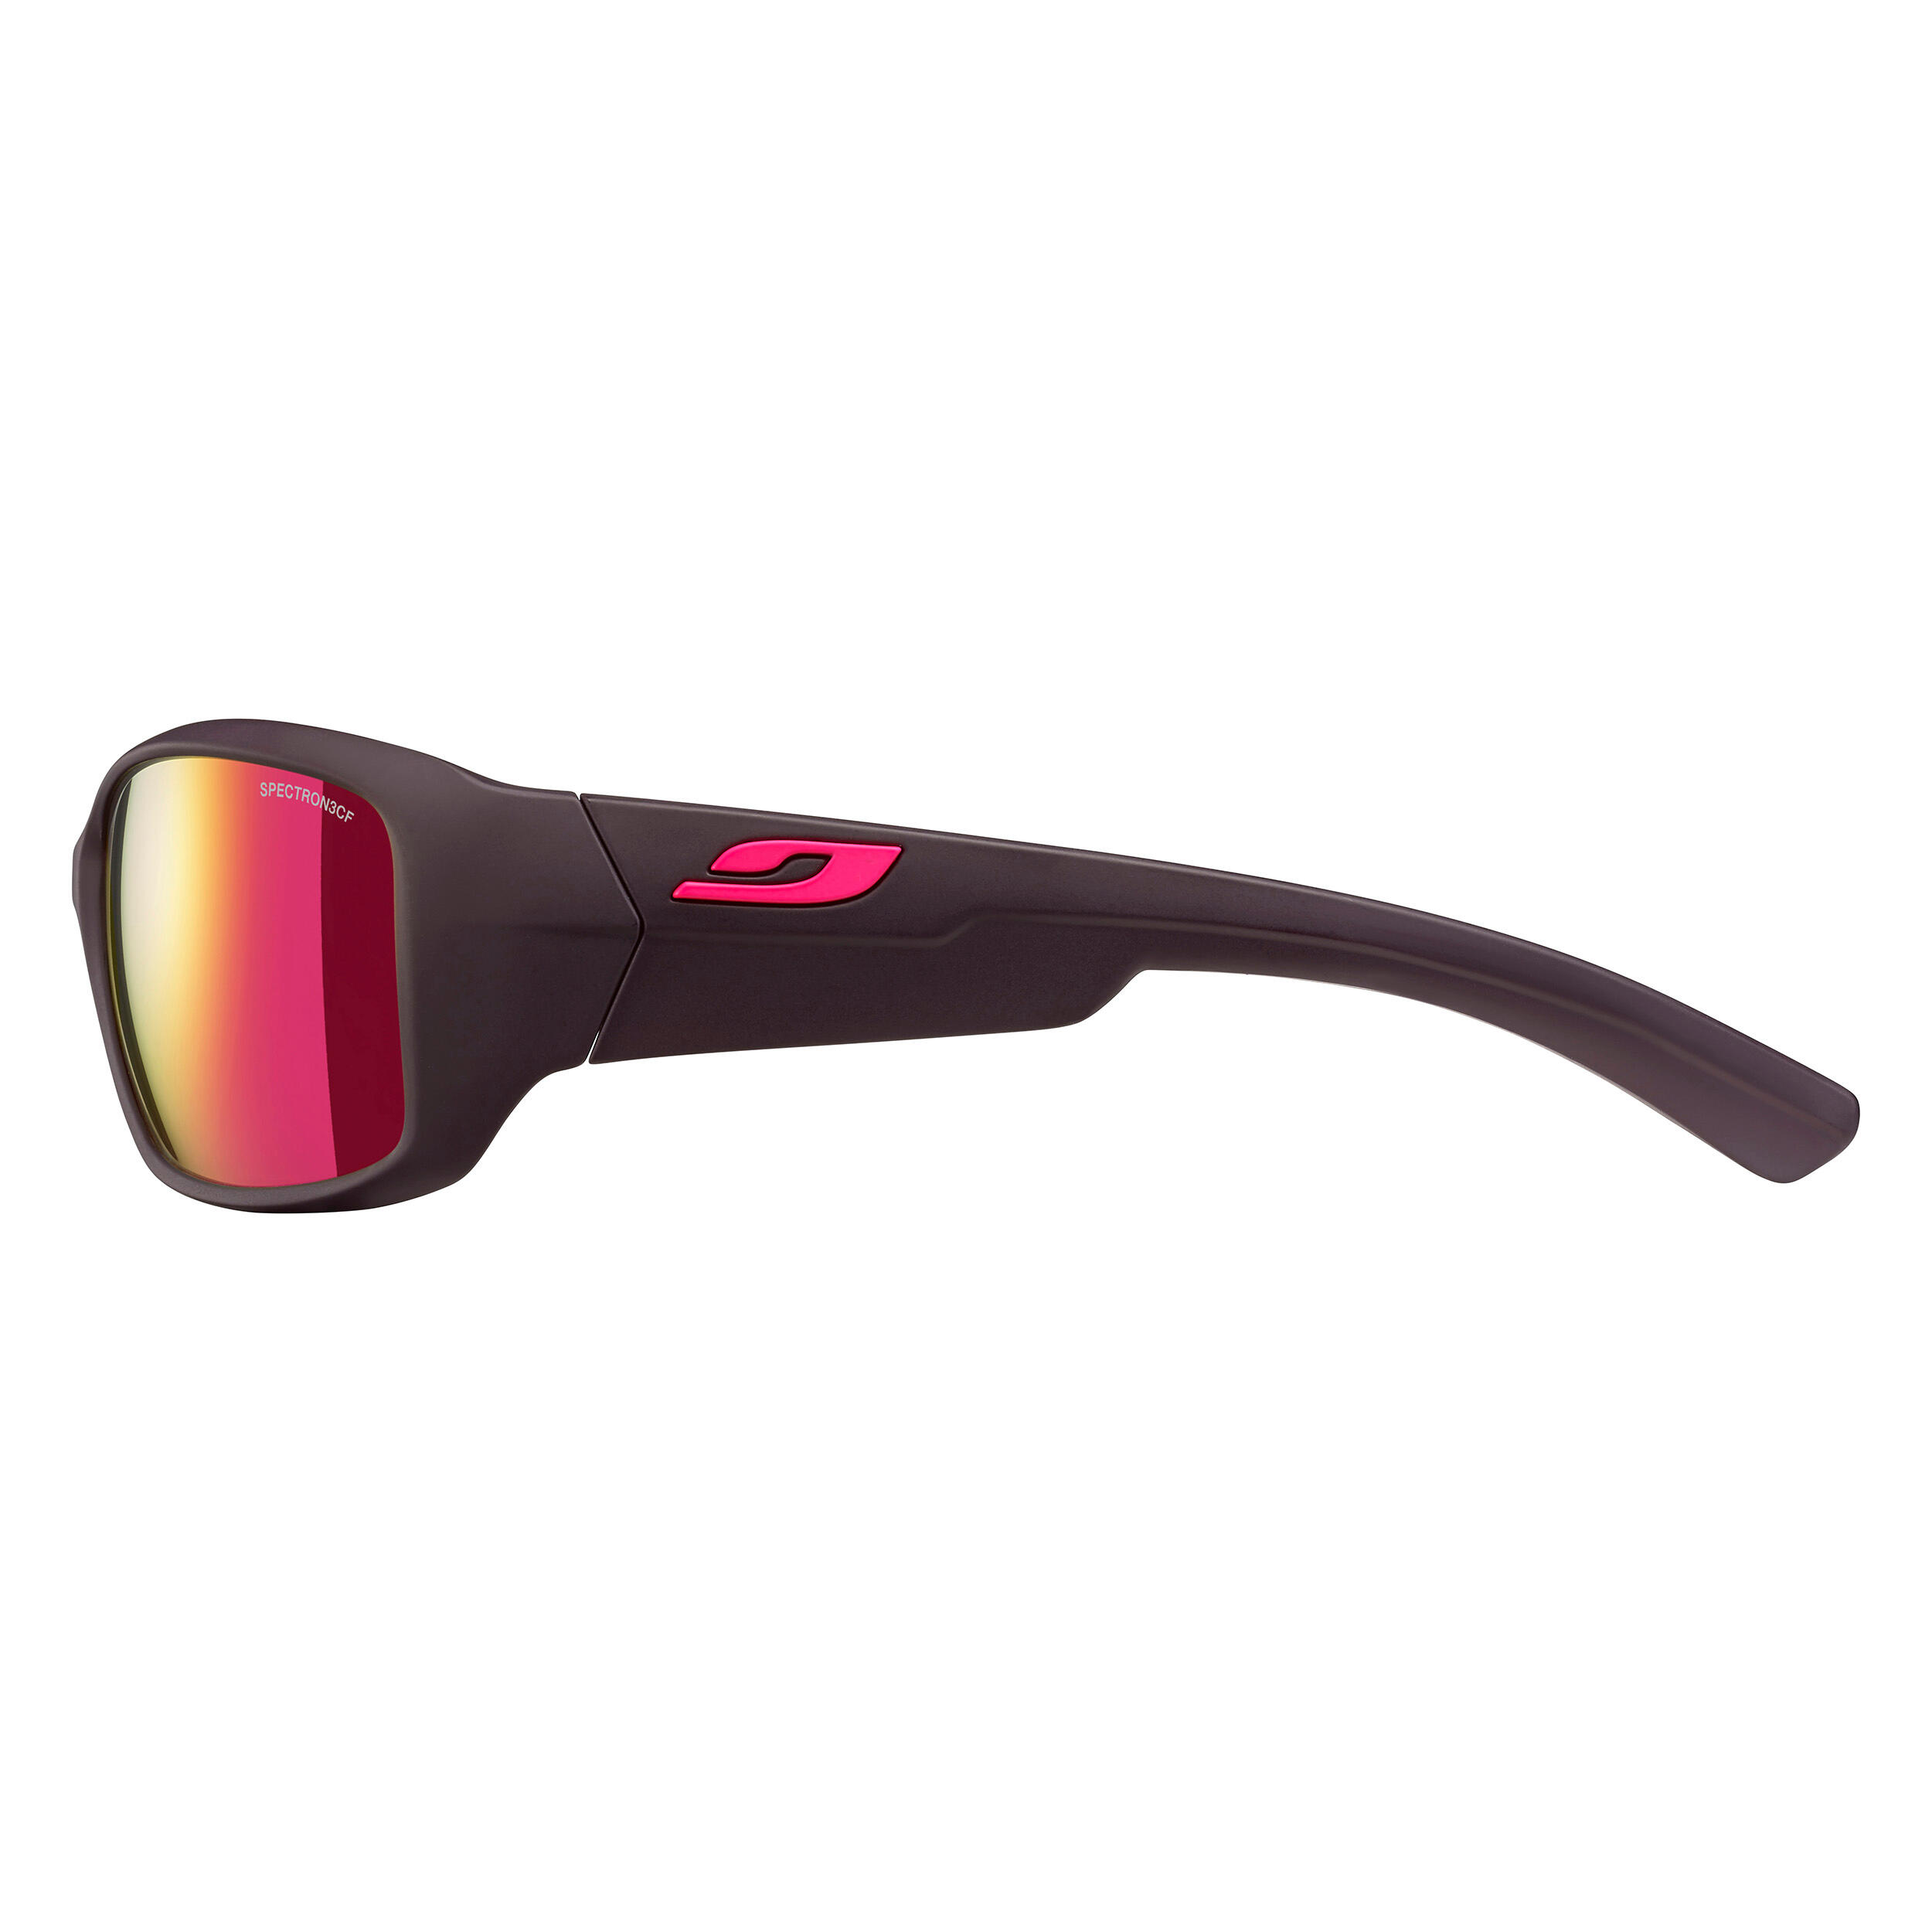 Adults Hiking Sunglasses - JULBO WHOOPS - Category 3 3/3